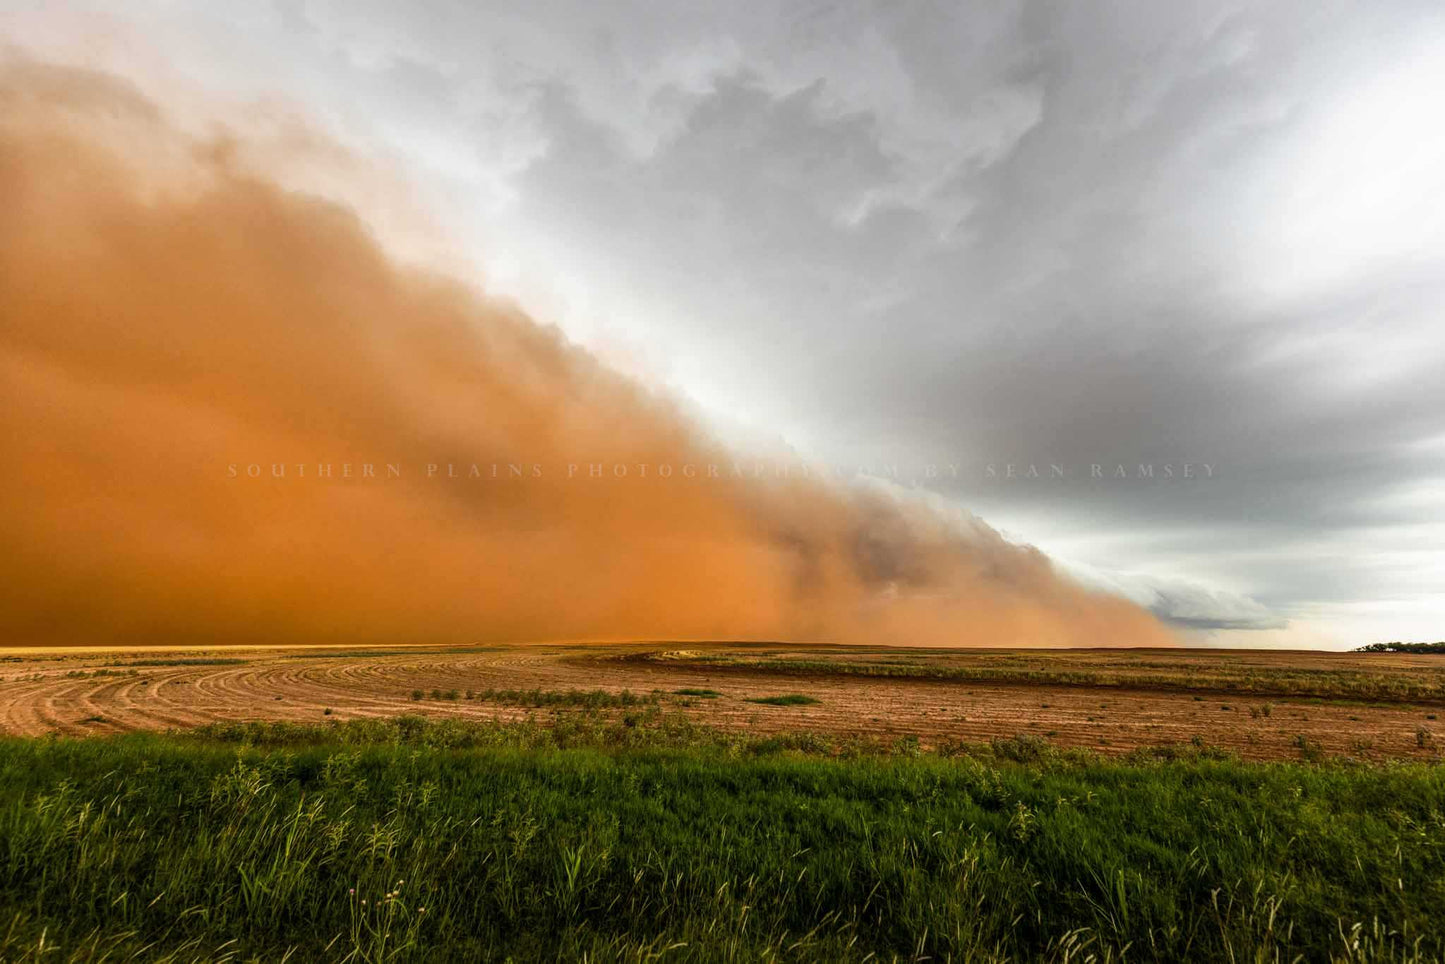 Haboob photography print of a dust storm sweeping over a field on a stormy spring day on the plains of Texas by Sean Ramsey of Southern Plains Photography.